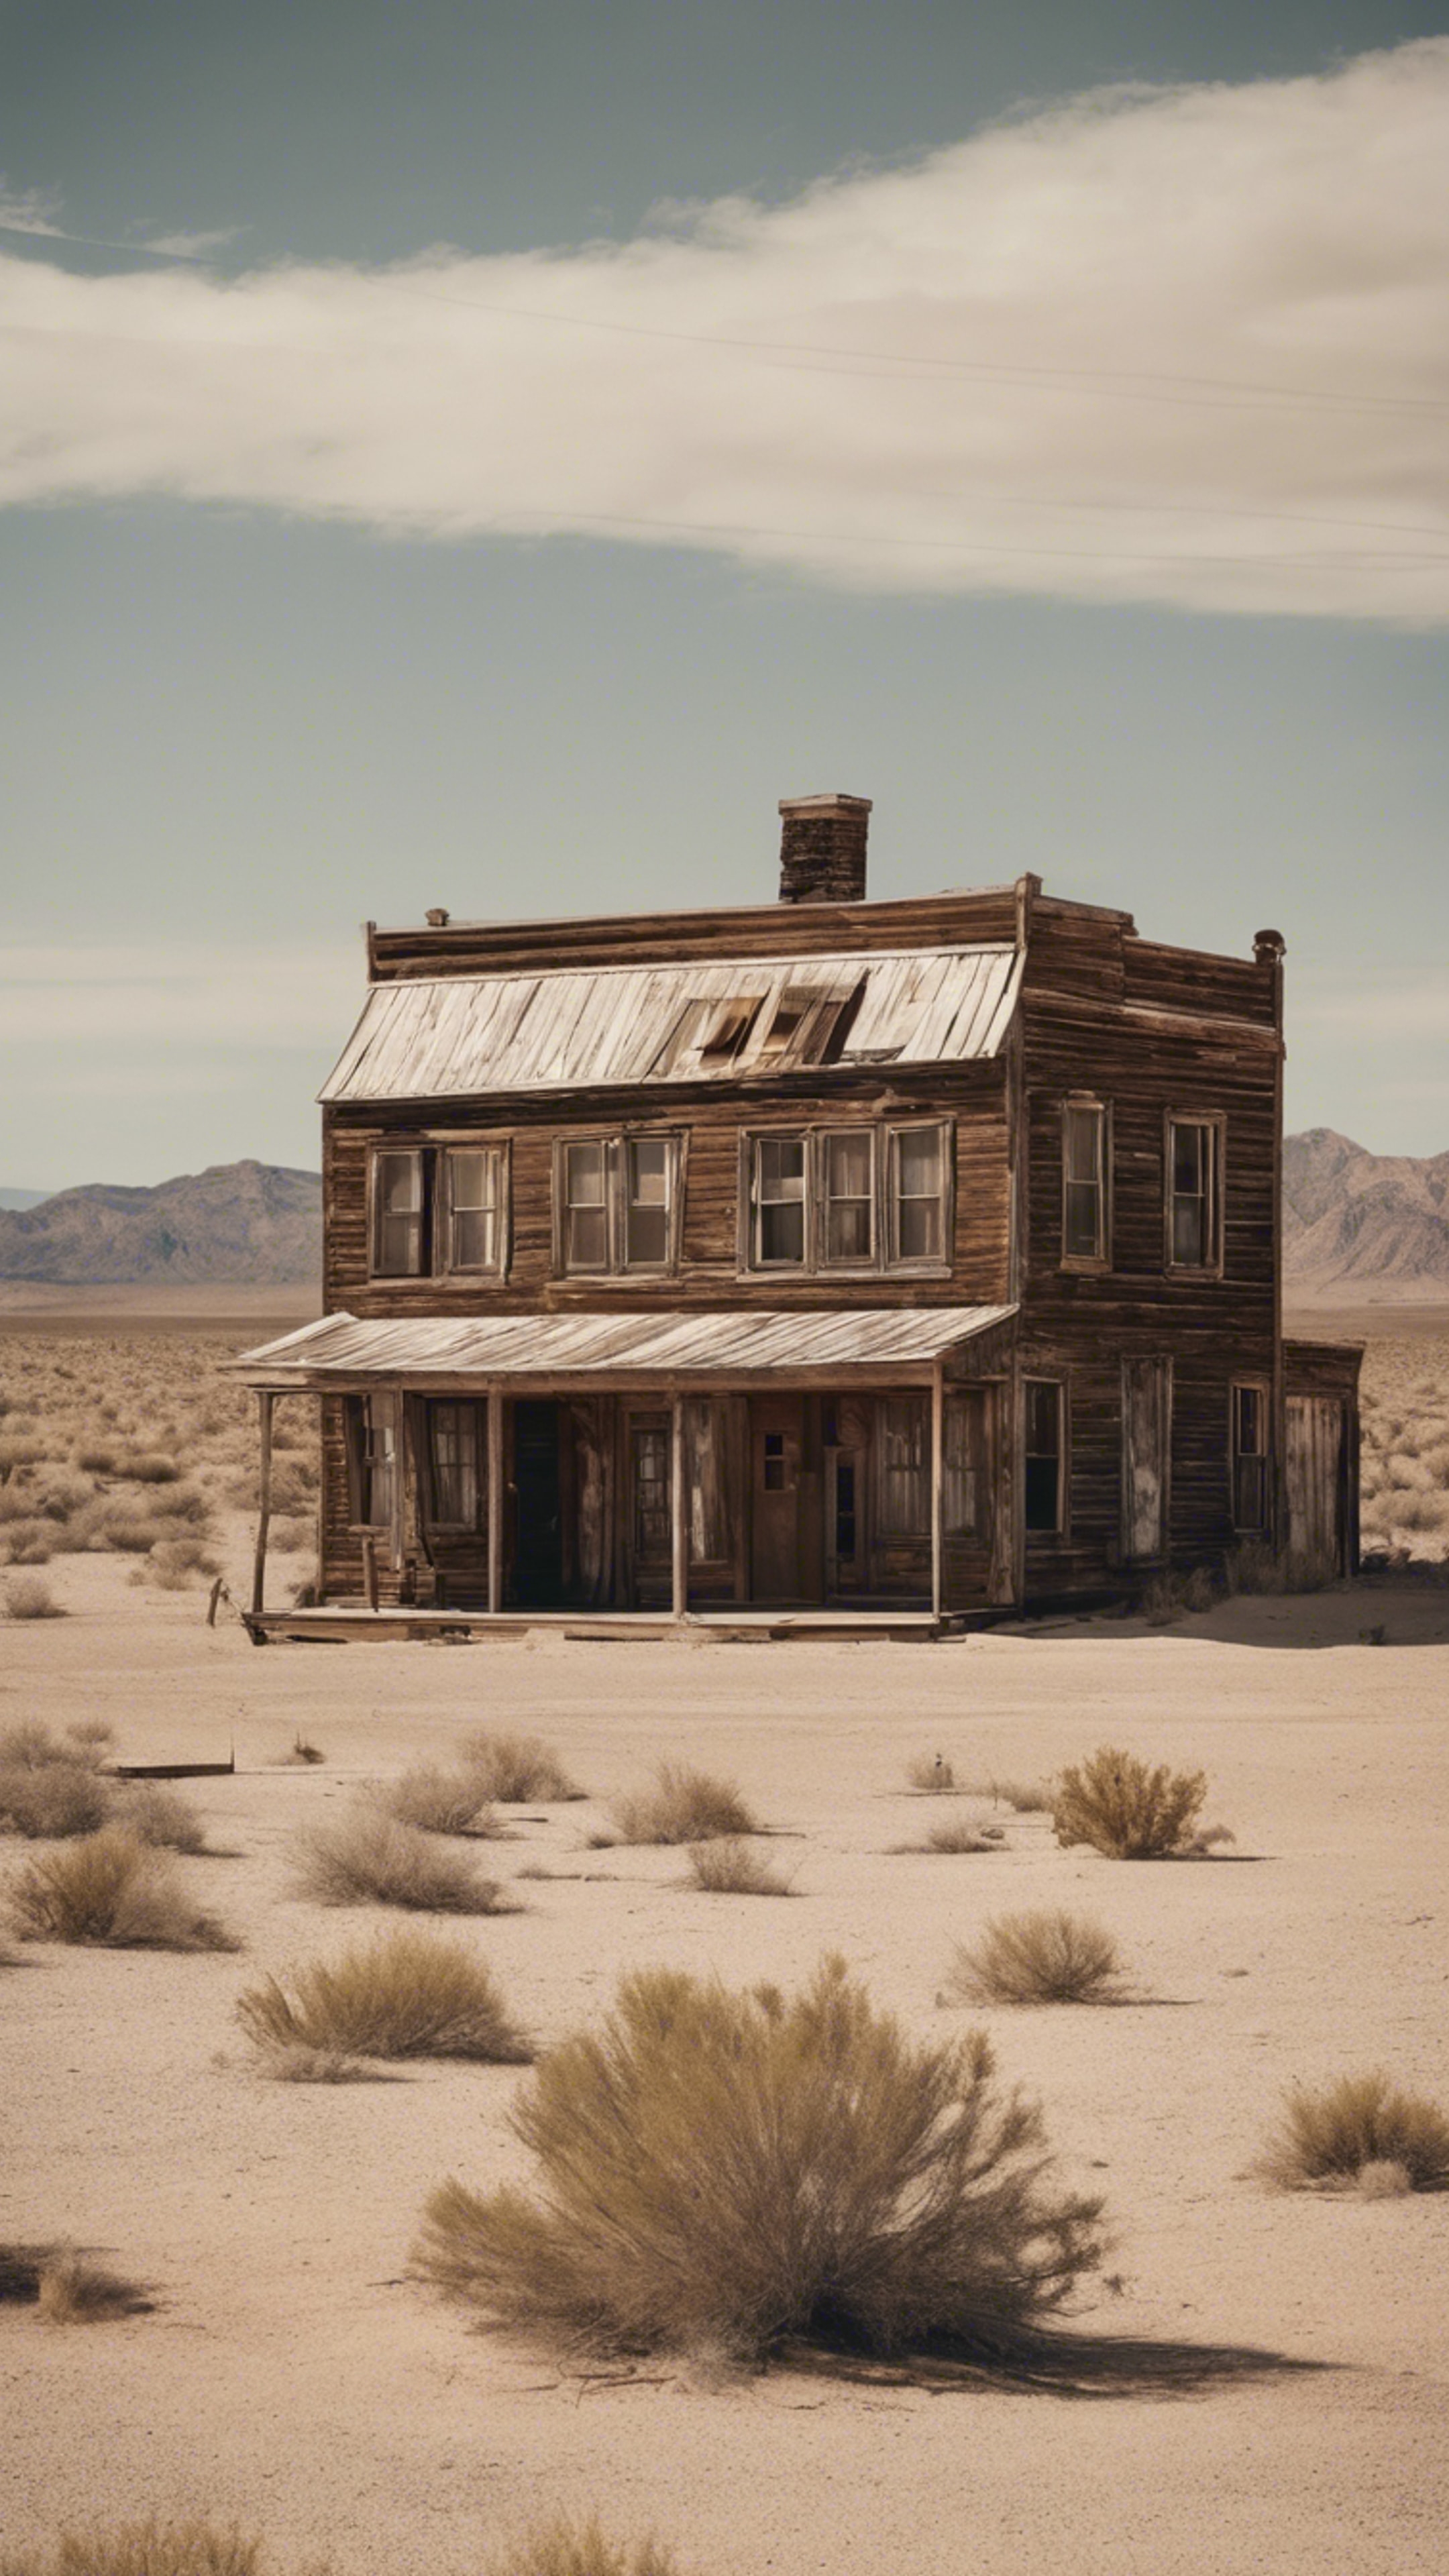 An old western ghost town located in the heart of an inhospitable sandy desert. Tapeta[5d1c1c6d4731481194e6]